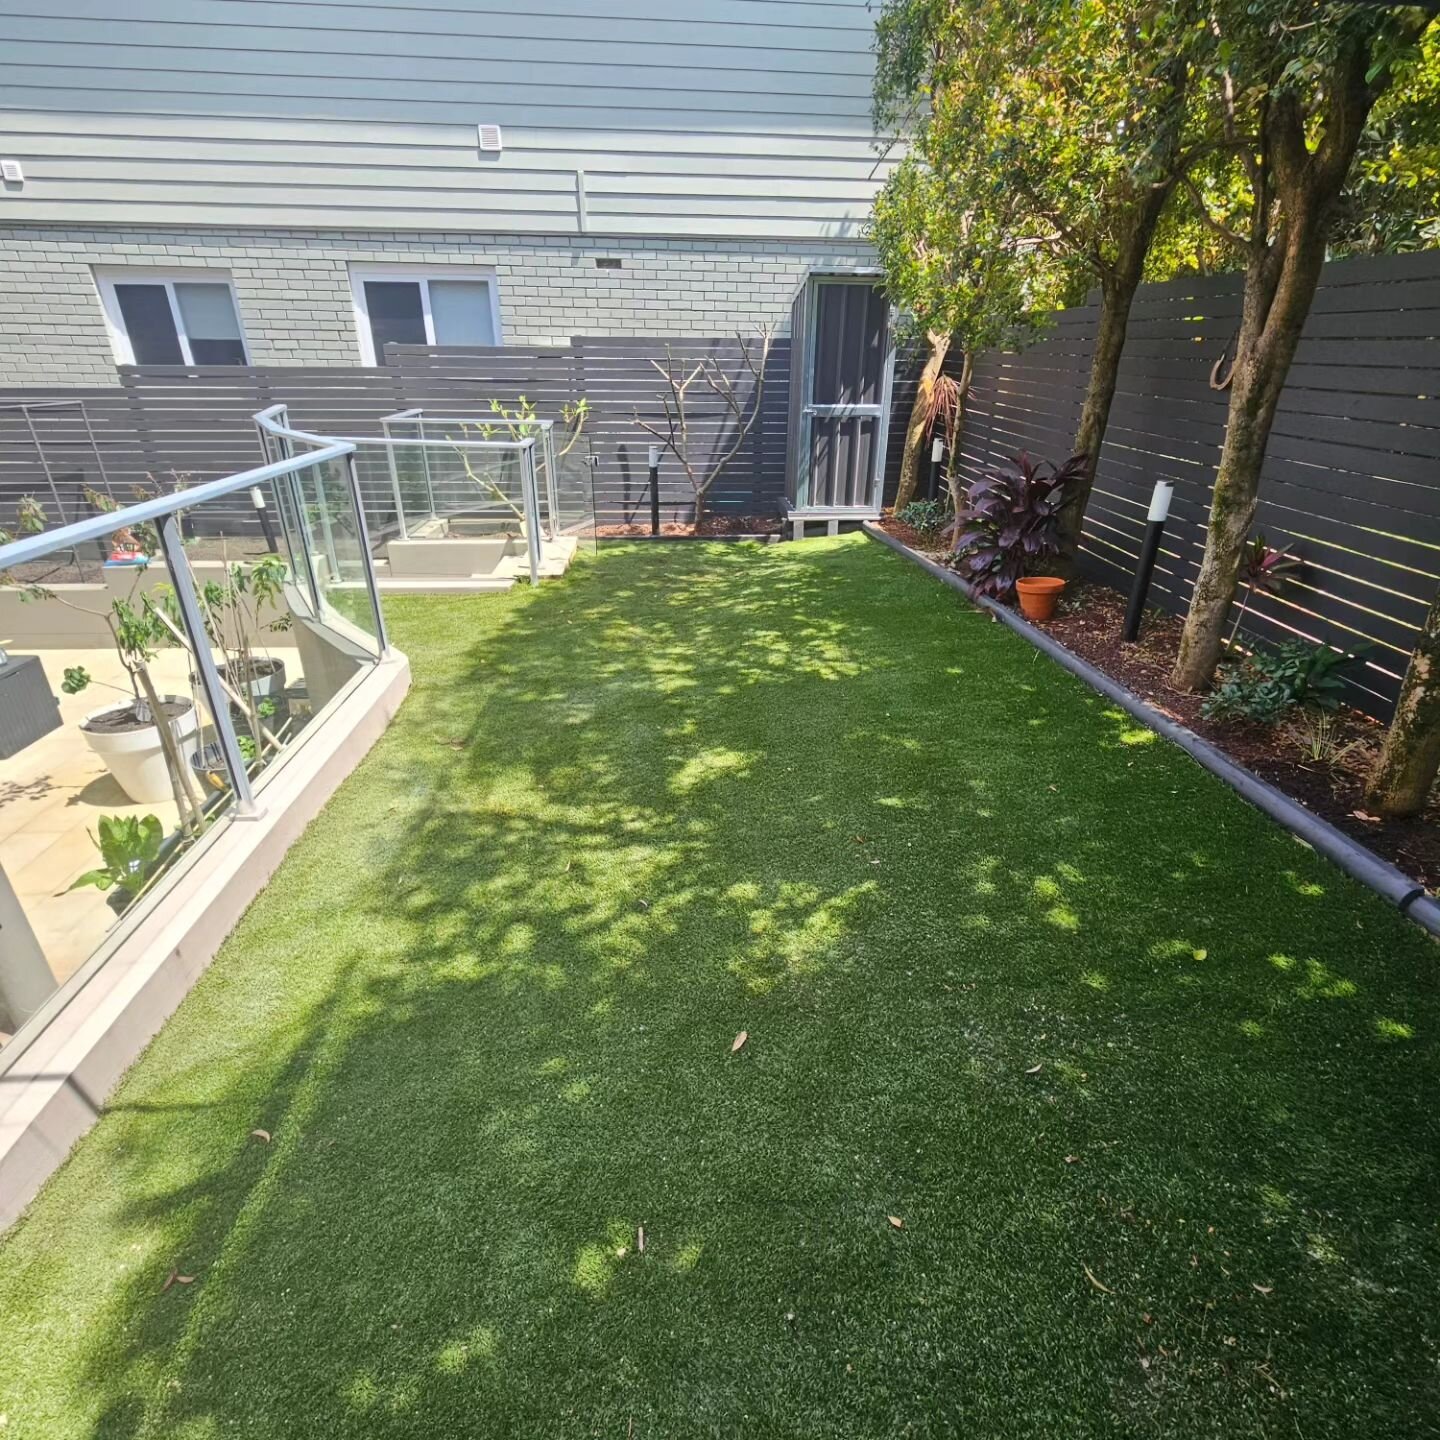 Astro turfing, no mow grass a perfect low maintenance option

Give magnolia a call for a free quote

#astroturf #landscaping #magnolia #horticulture